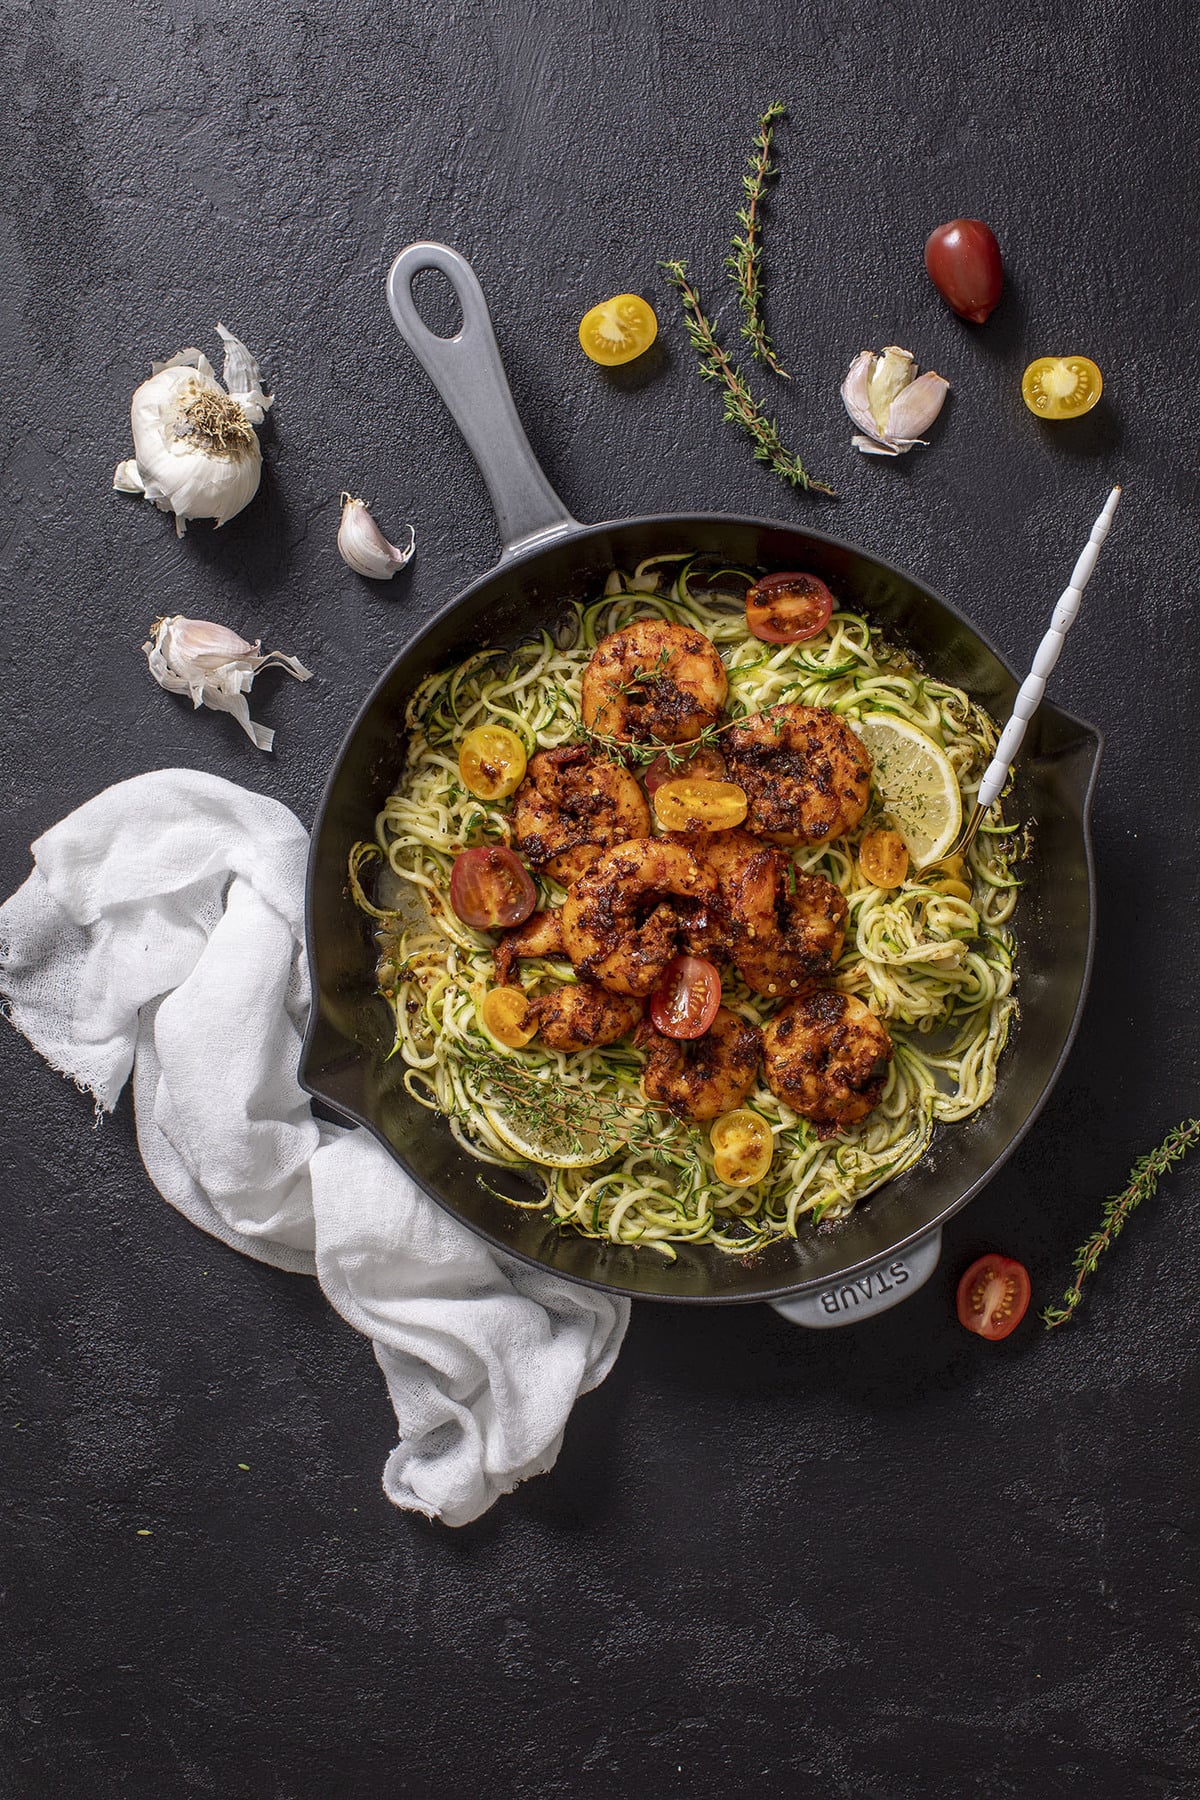 Skillet of shrimp on a bed of zucchini noodles